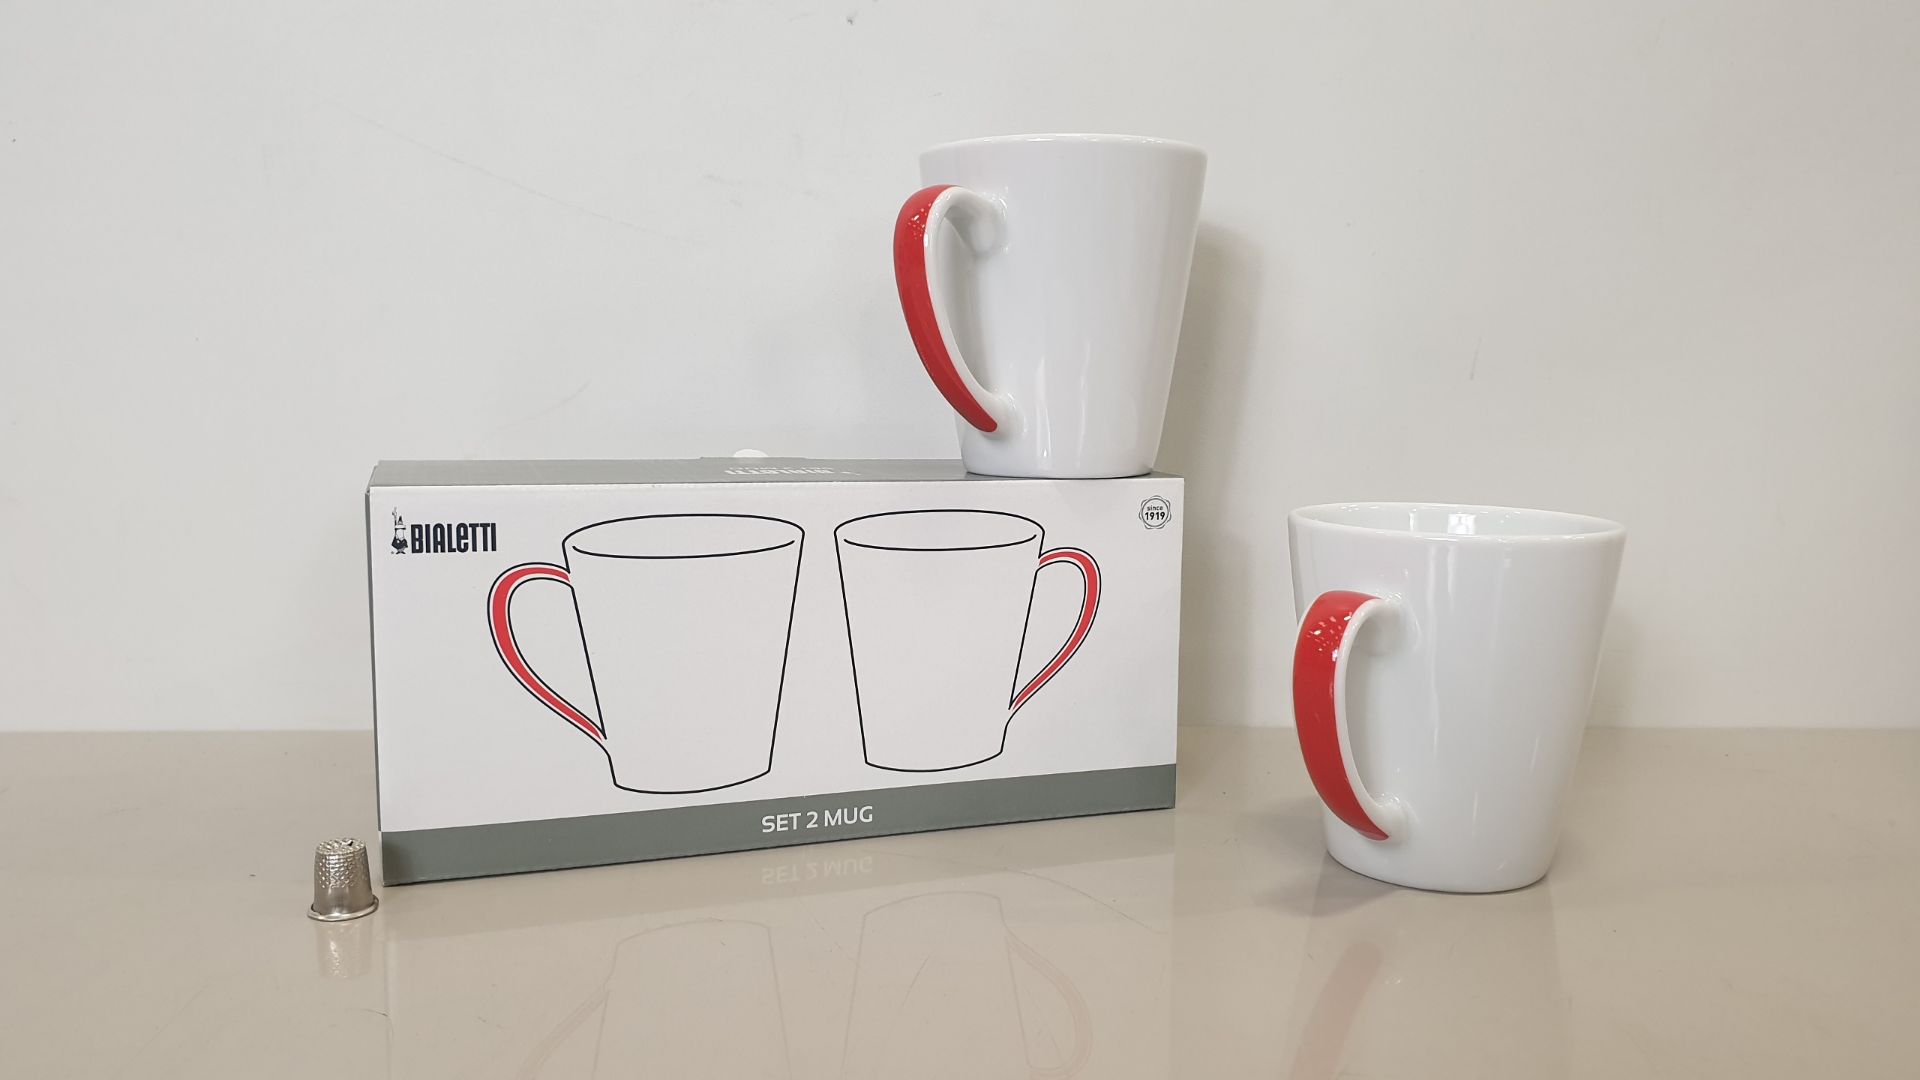 24 X SETS OF 2 BIALETTI CAPPUCCINO MUGS - IN 6 CARTONS